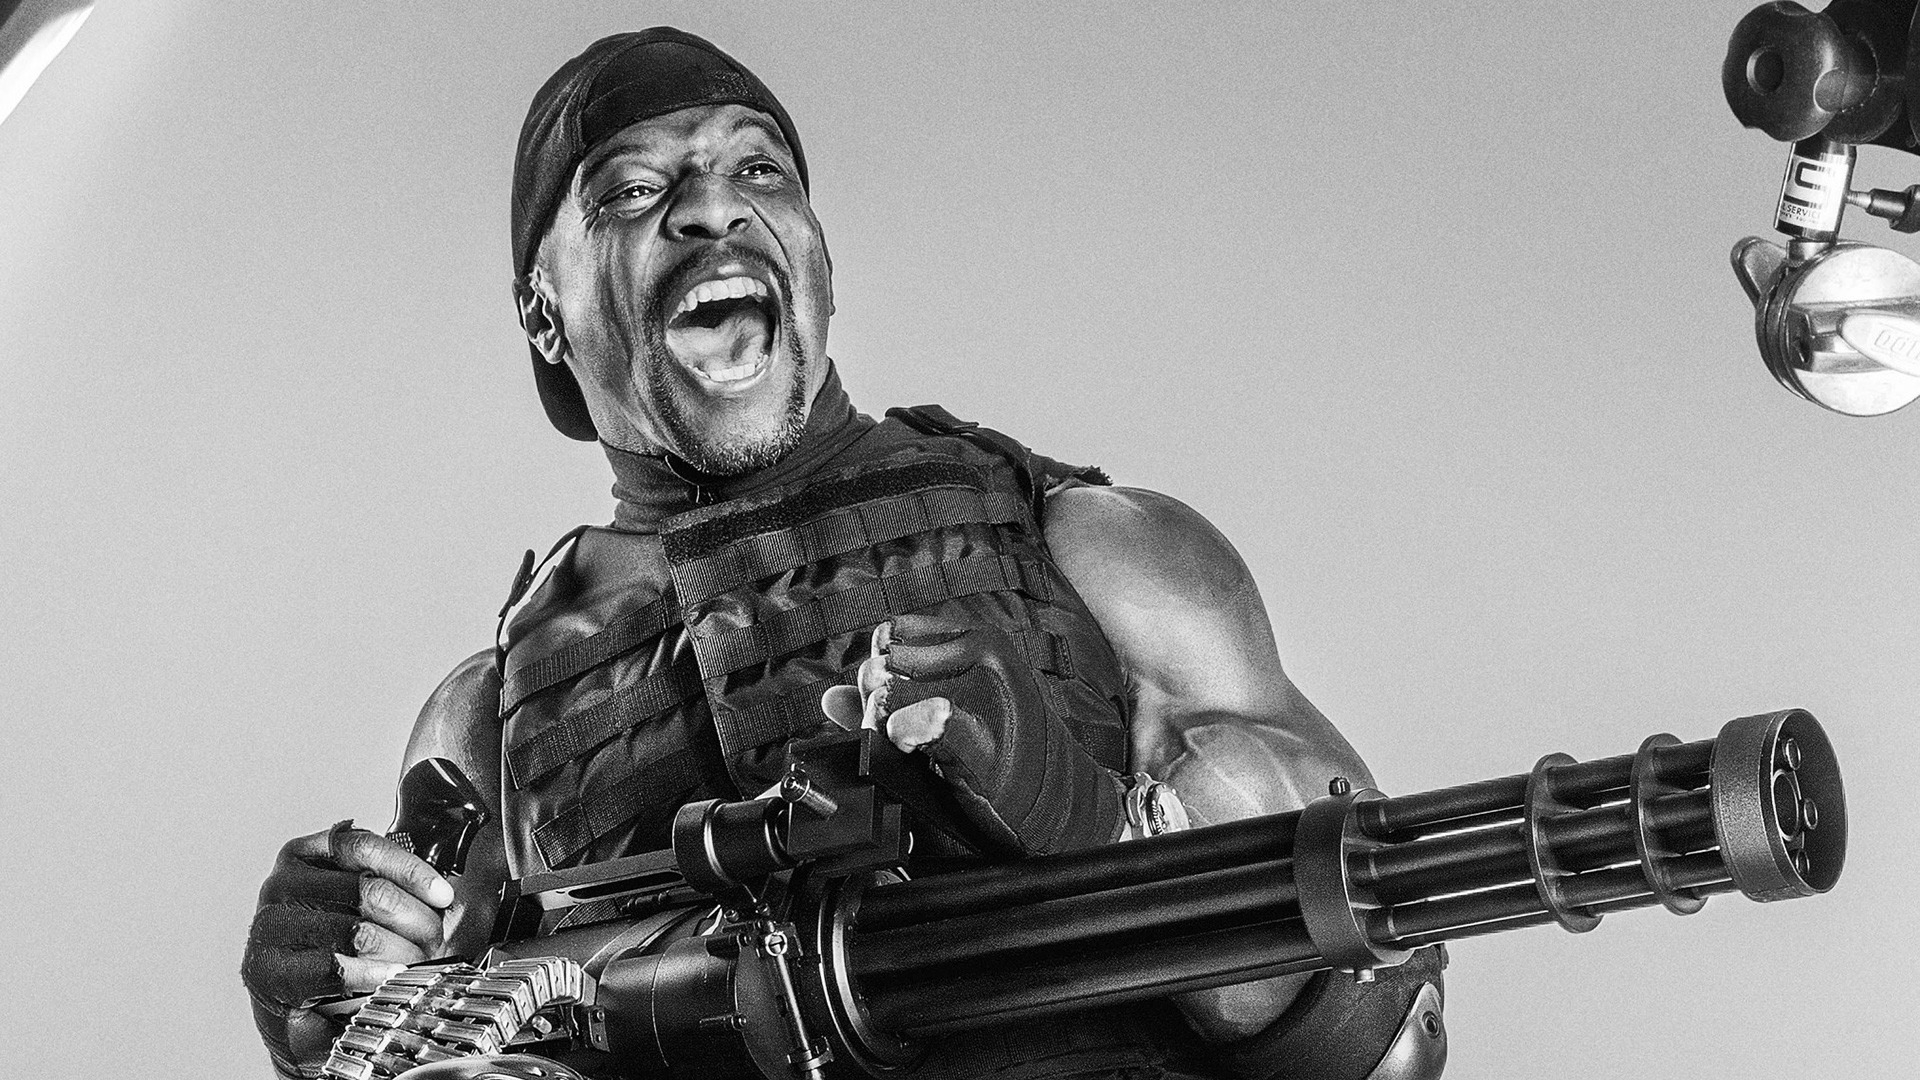 Terry Crews The Expendables 3 for 1920 x 1080 HDTV 1080p resolution